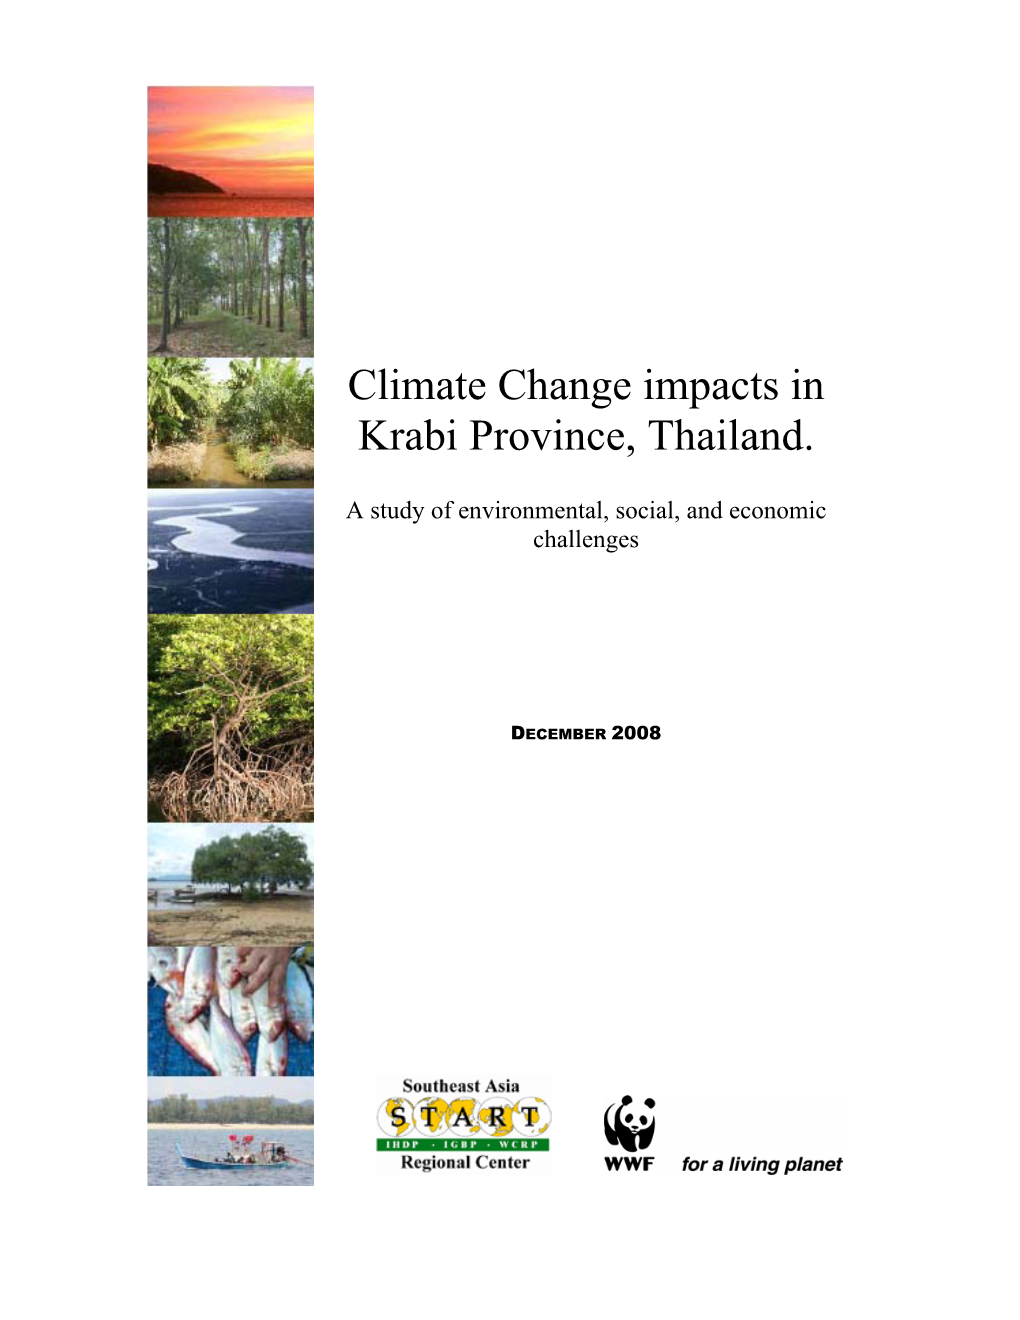 Climate Change Impacts in Krabi Province, Thailand